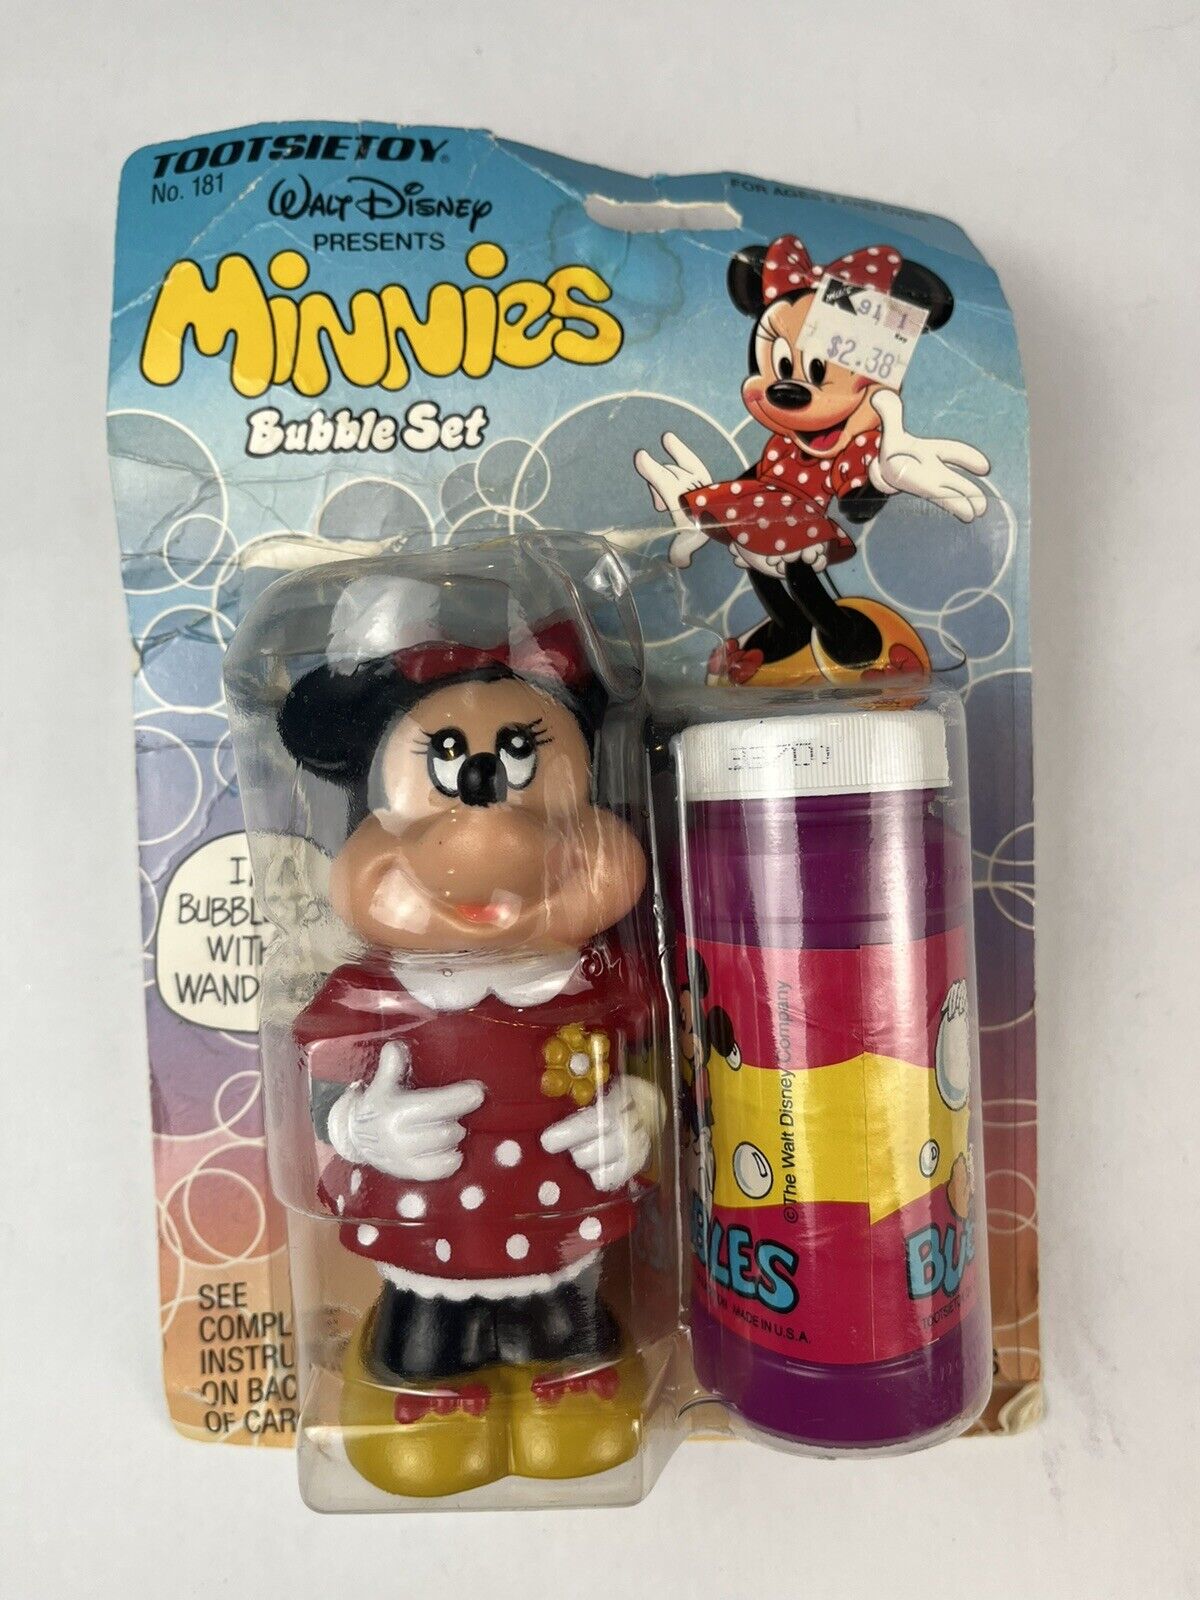 Vintage Disney 1986 Minnie Mouse Bubble Blower Set Tootsie Toy New Old Stock